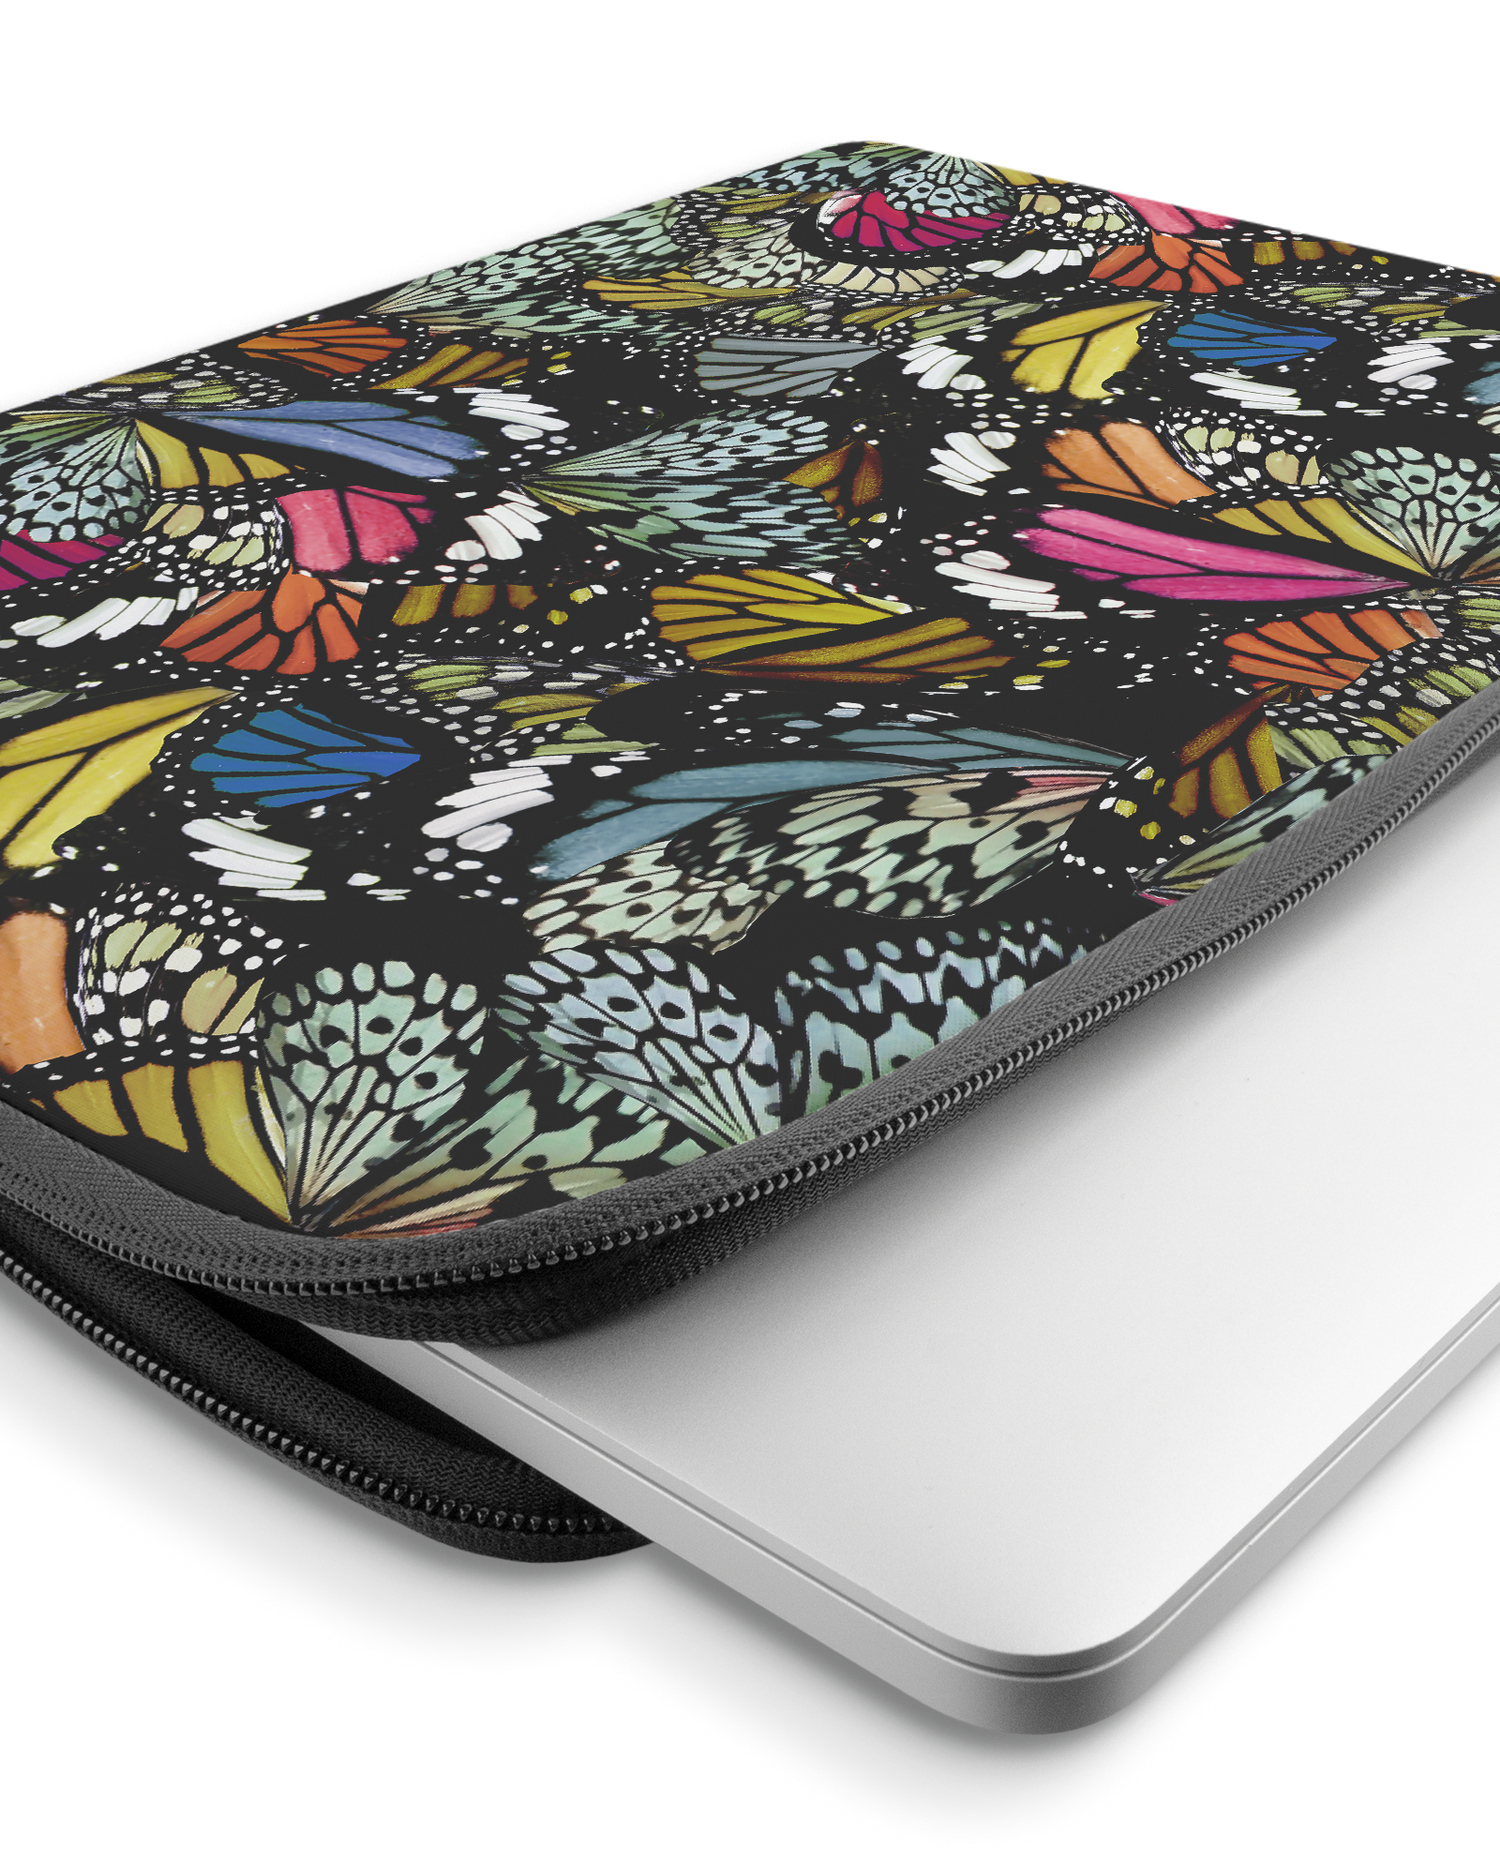 Psychedelic Butterflies Laptop Case 15-16 inch with device inside